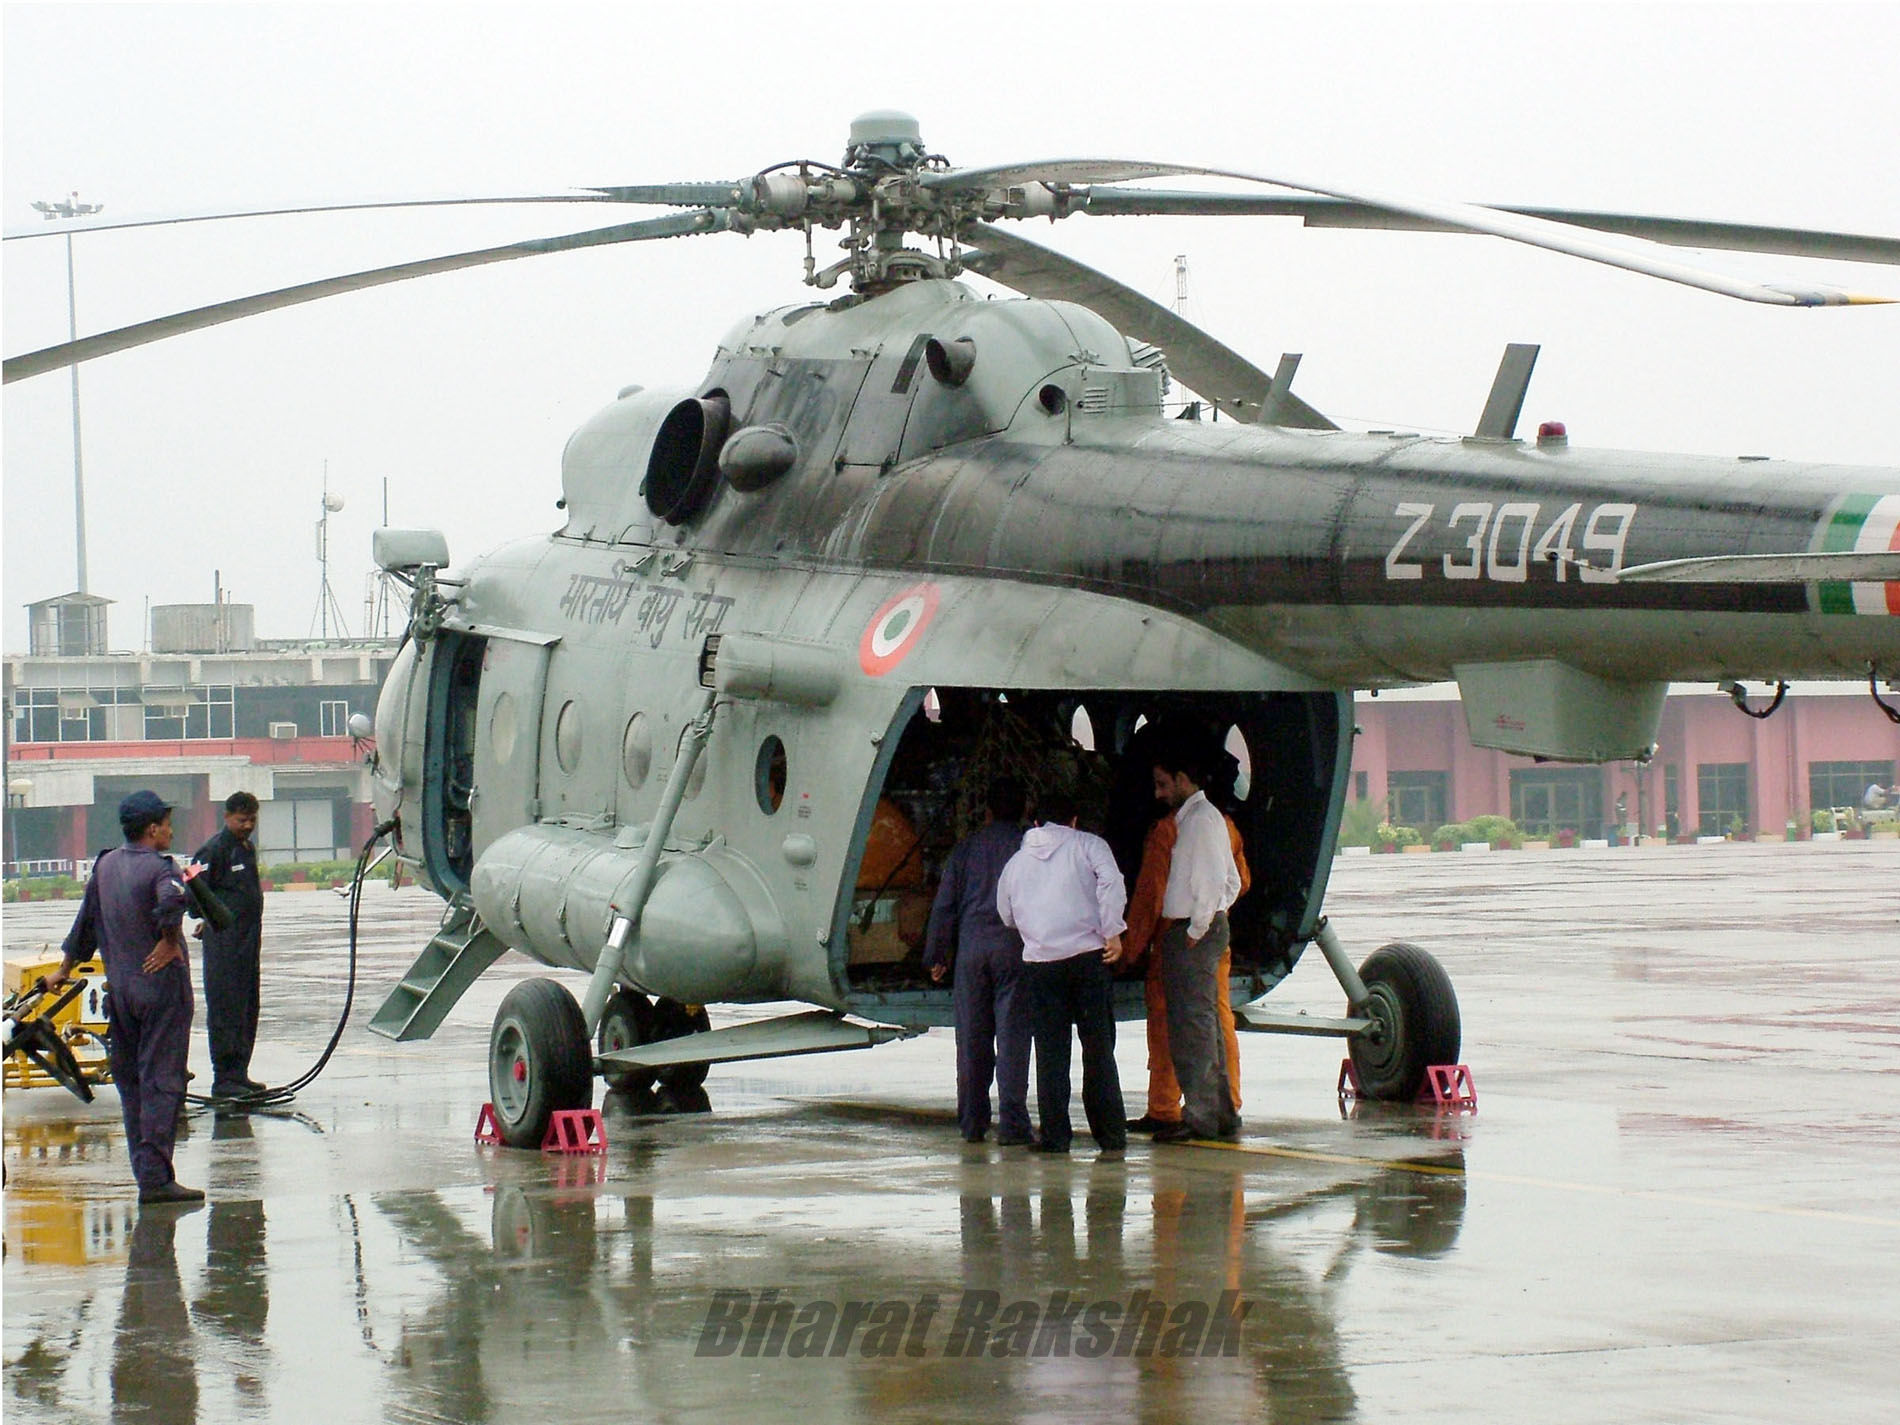 IAF personnel loading relief materials for the flood-affected people in Gujarat on July 3, 2005.